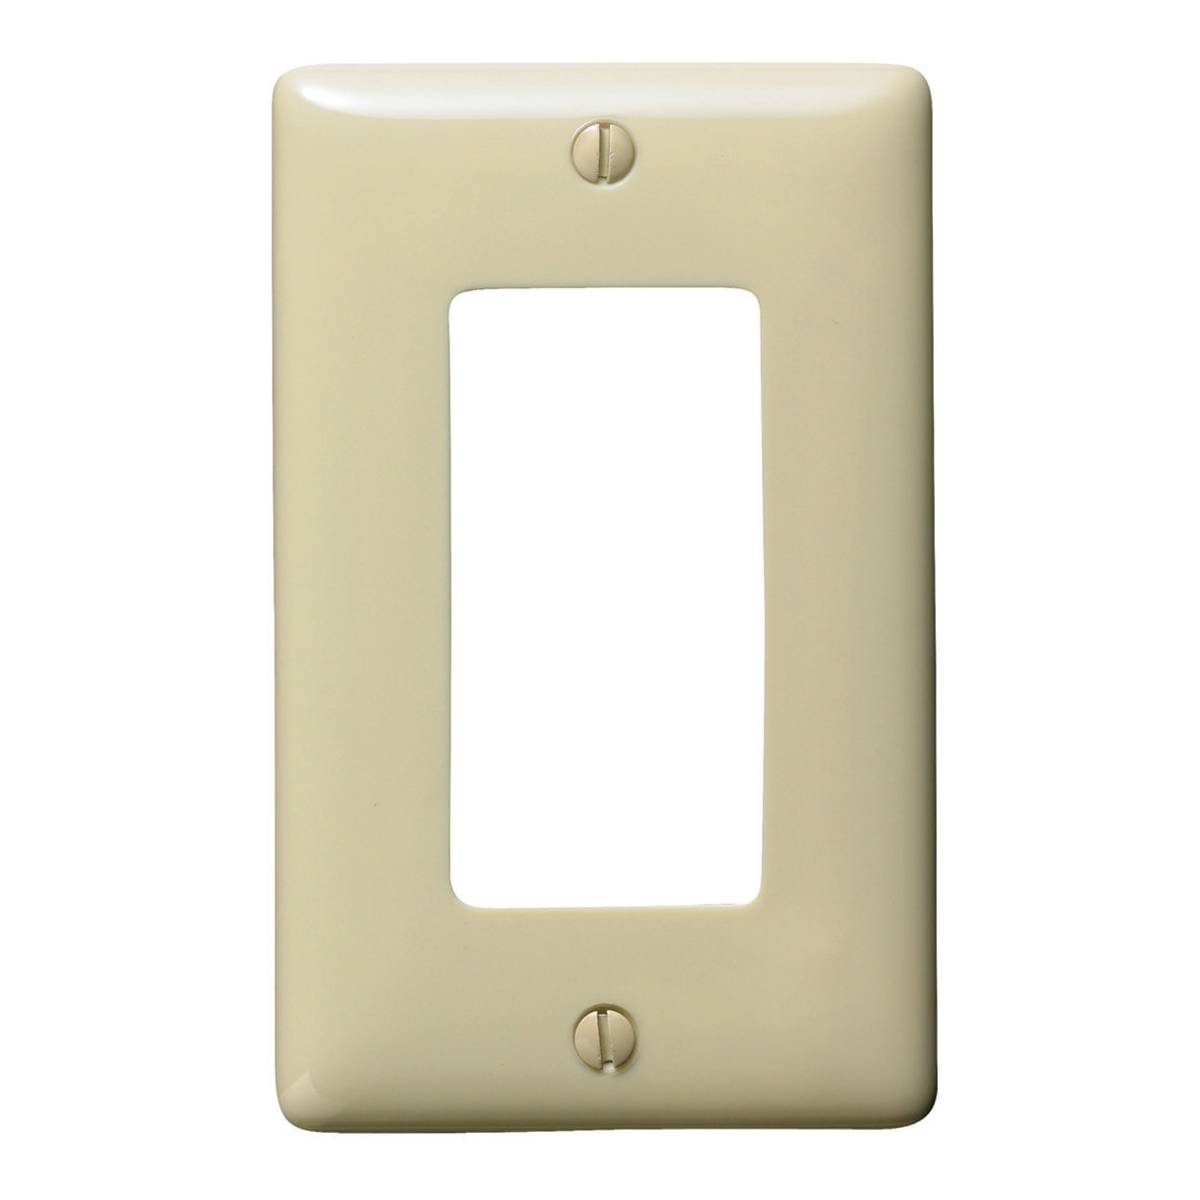 Wiring Device-Kellems Style Line® NPJ26I Mid Sized Decorative Wallplate, 1 Gangs, 3.13 in W x 4.88 in H, Nylon, Ivory (Planned Obsolescence by Manufacturer)